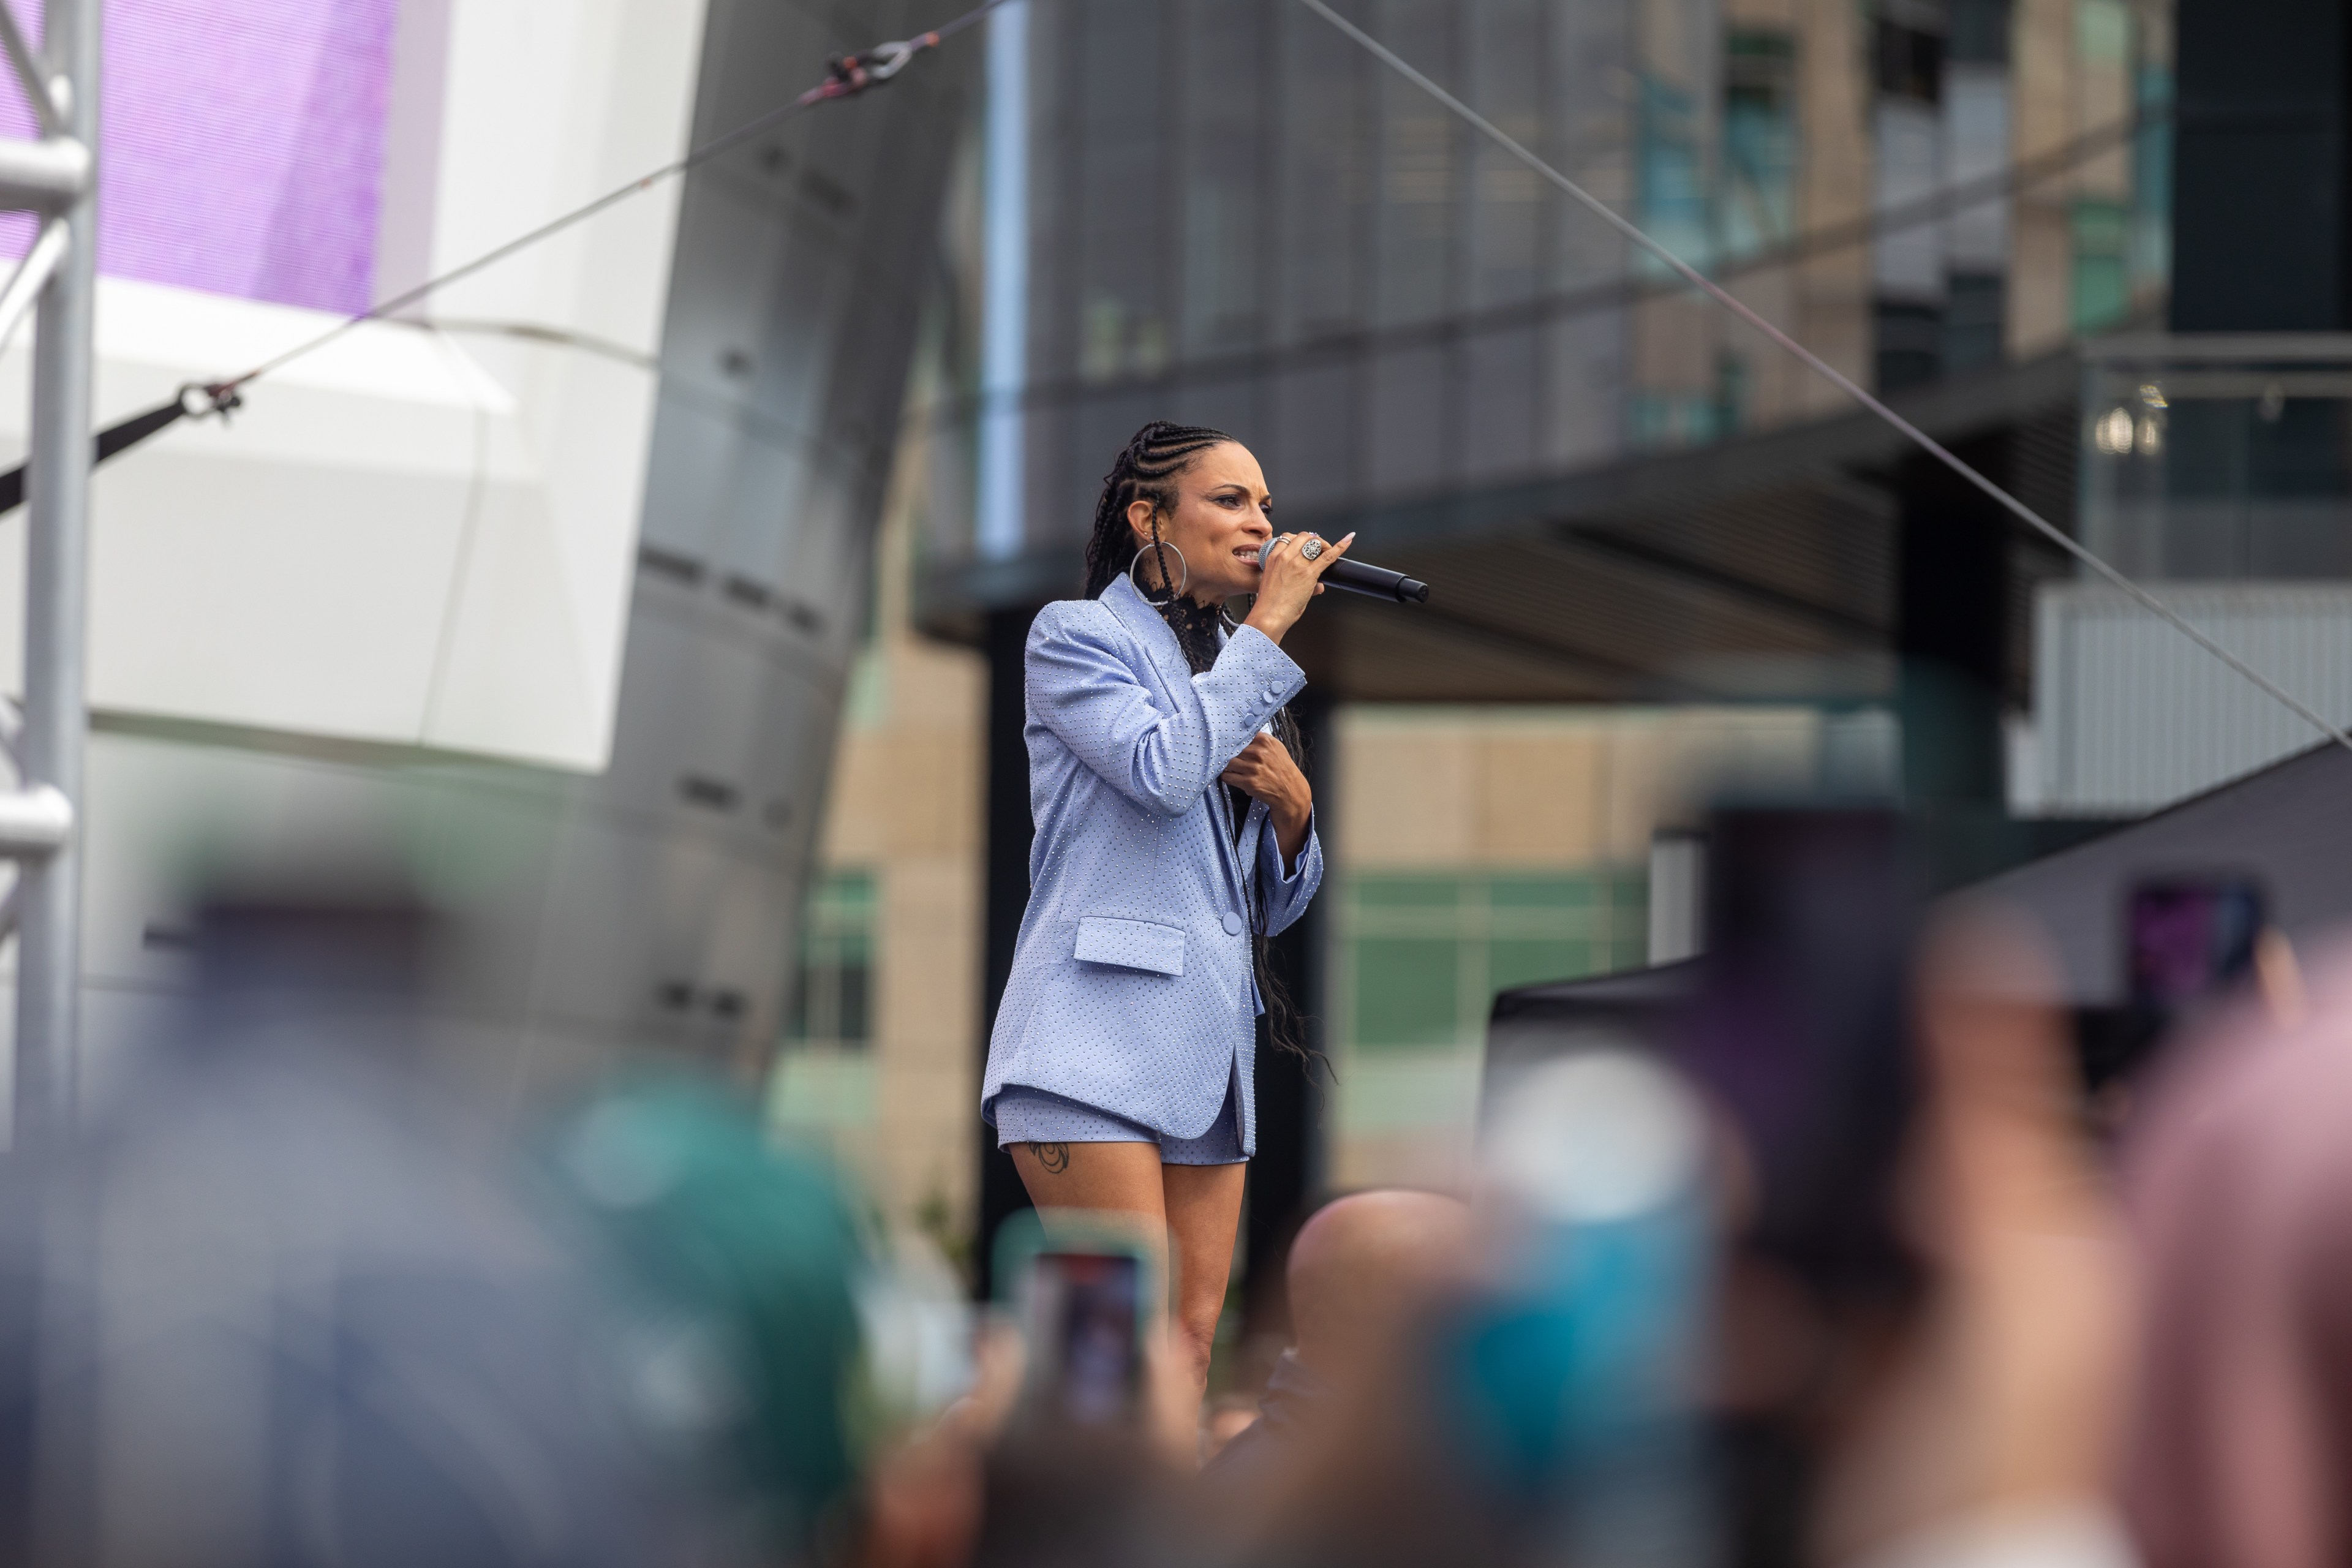 A woman is performing on stage in a city, holding a microphone and wearing a blue blazer, with an audience capturing the moment on their phones.